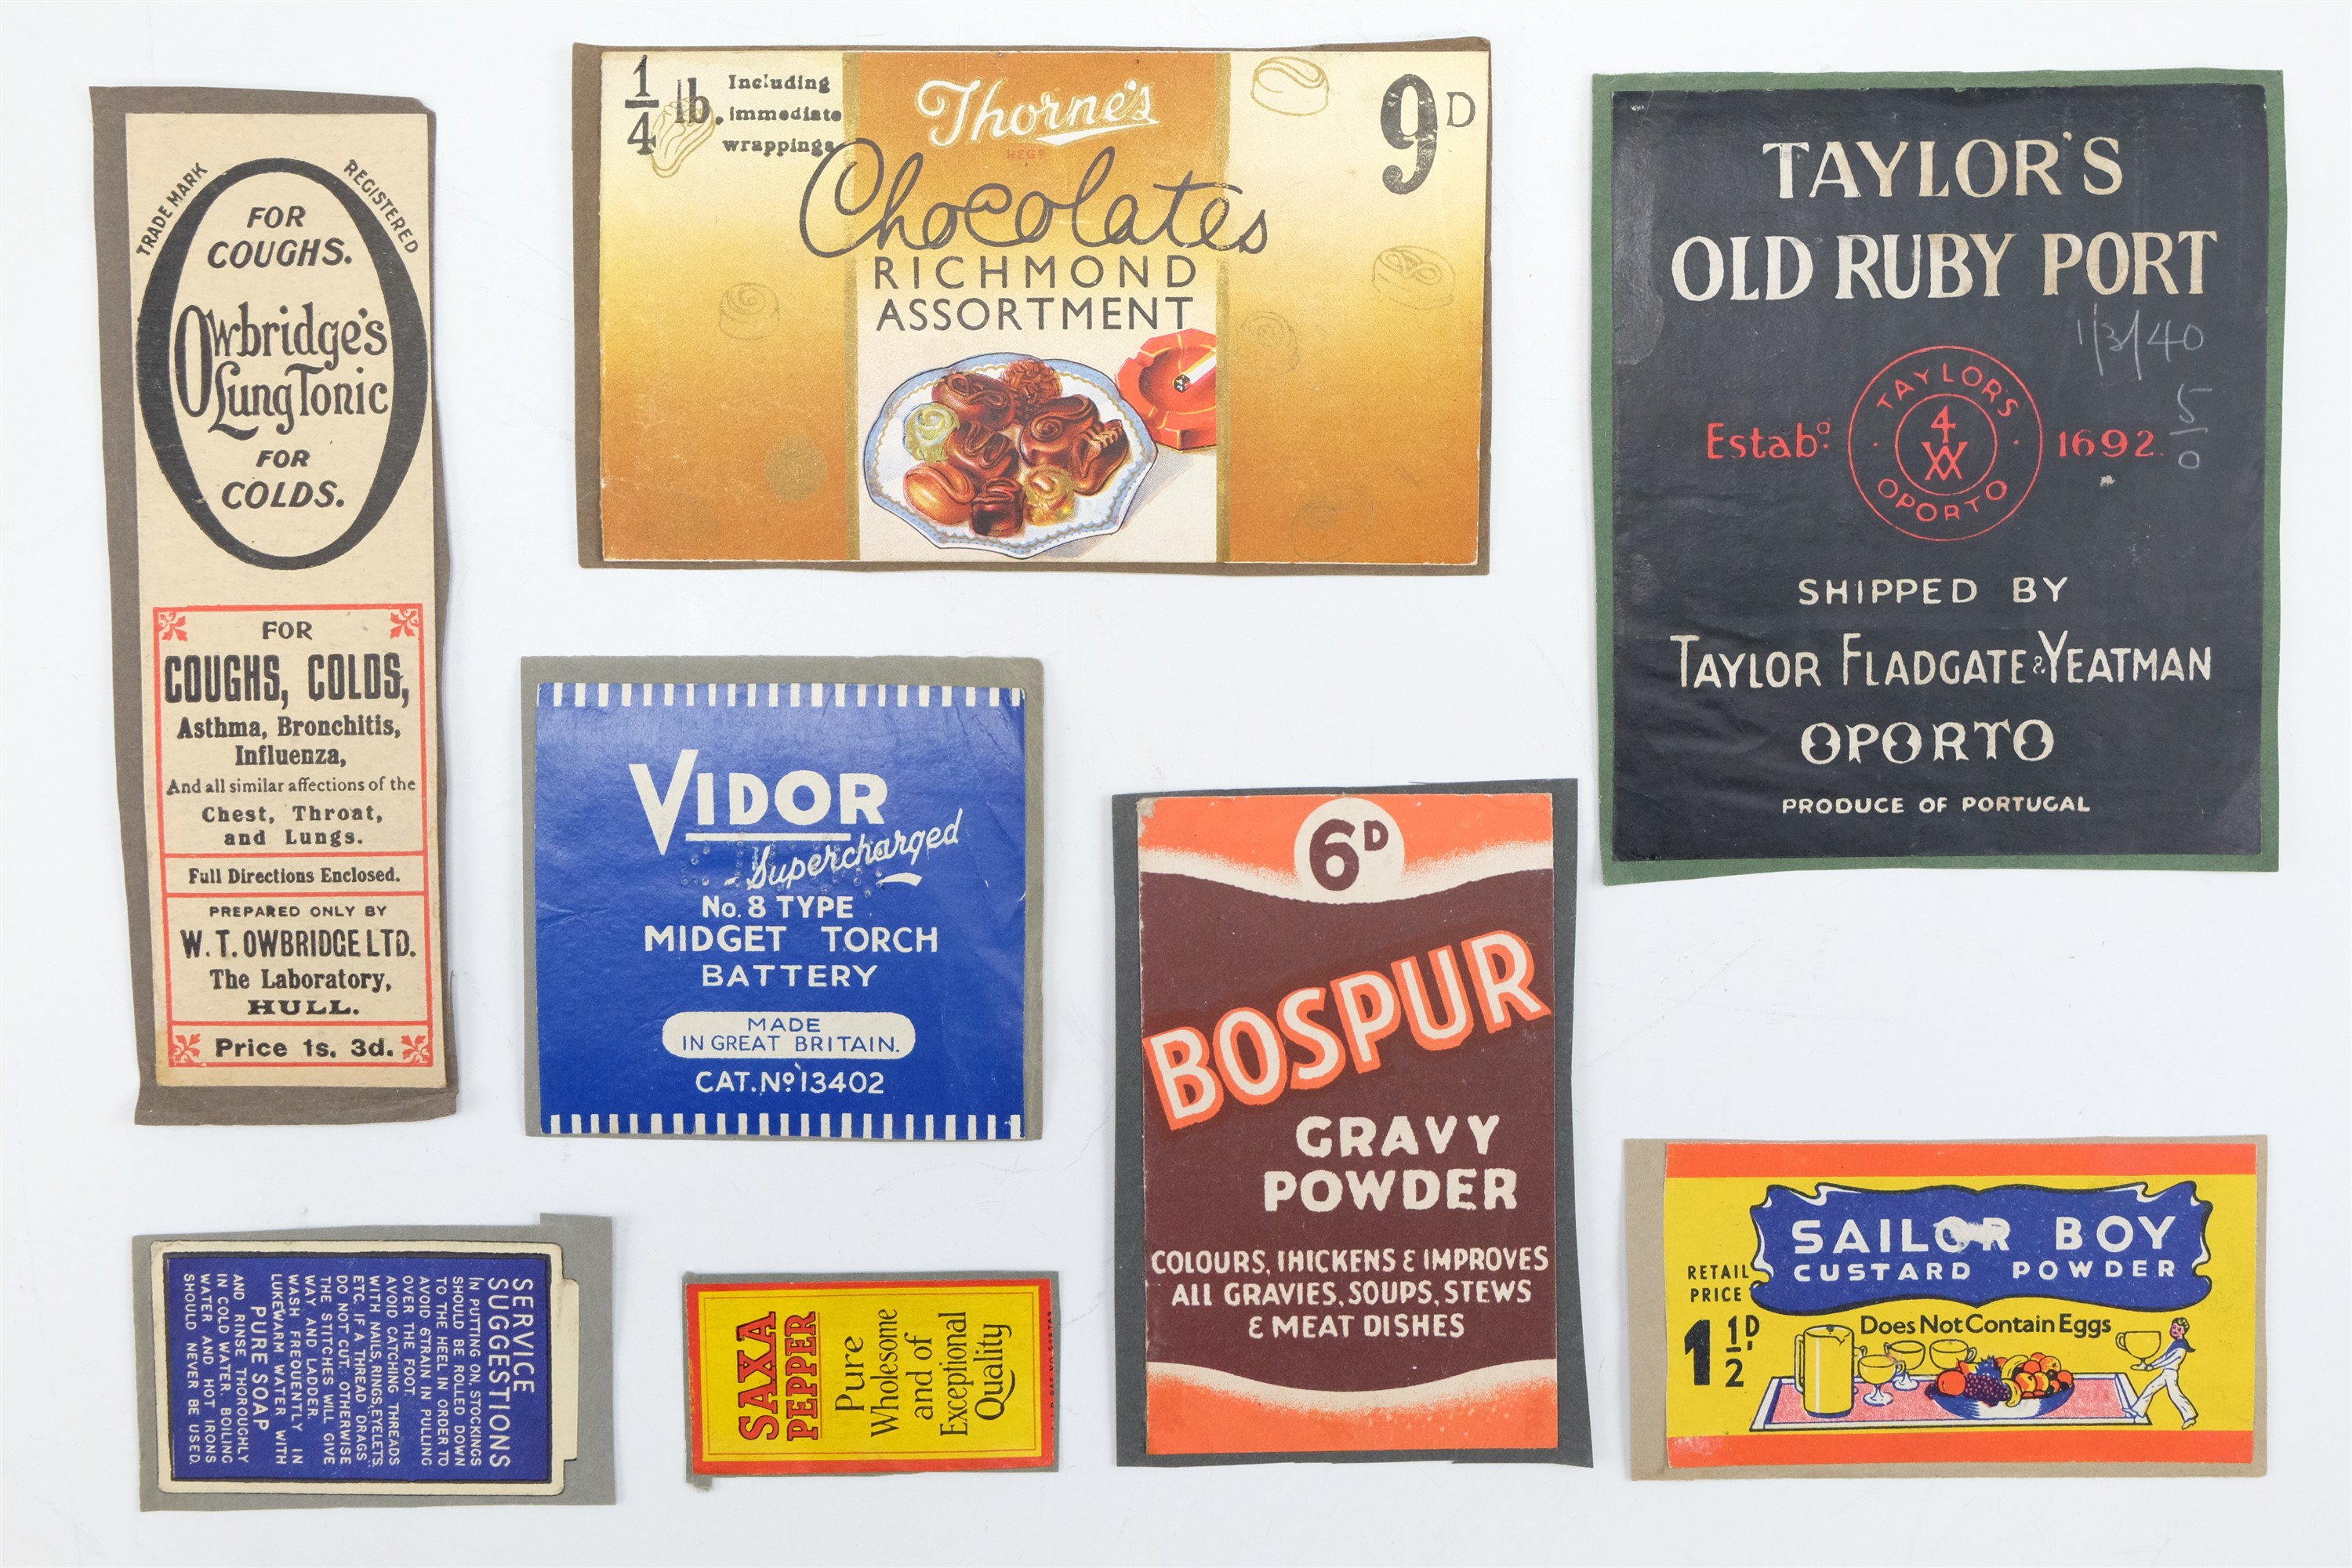 Eight vintage merchandising labels affixed to card including "Taylor's Old Ruby Port" and "Sailor